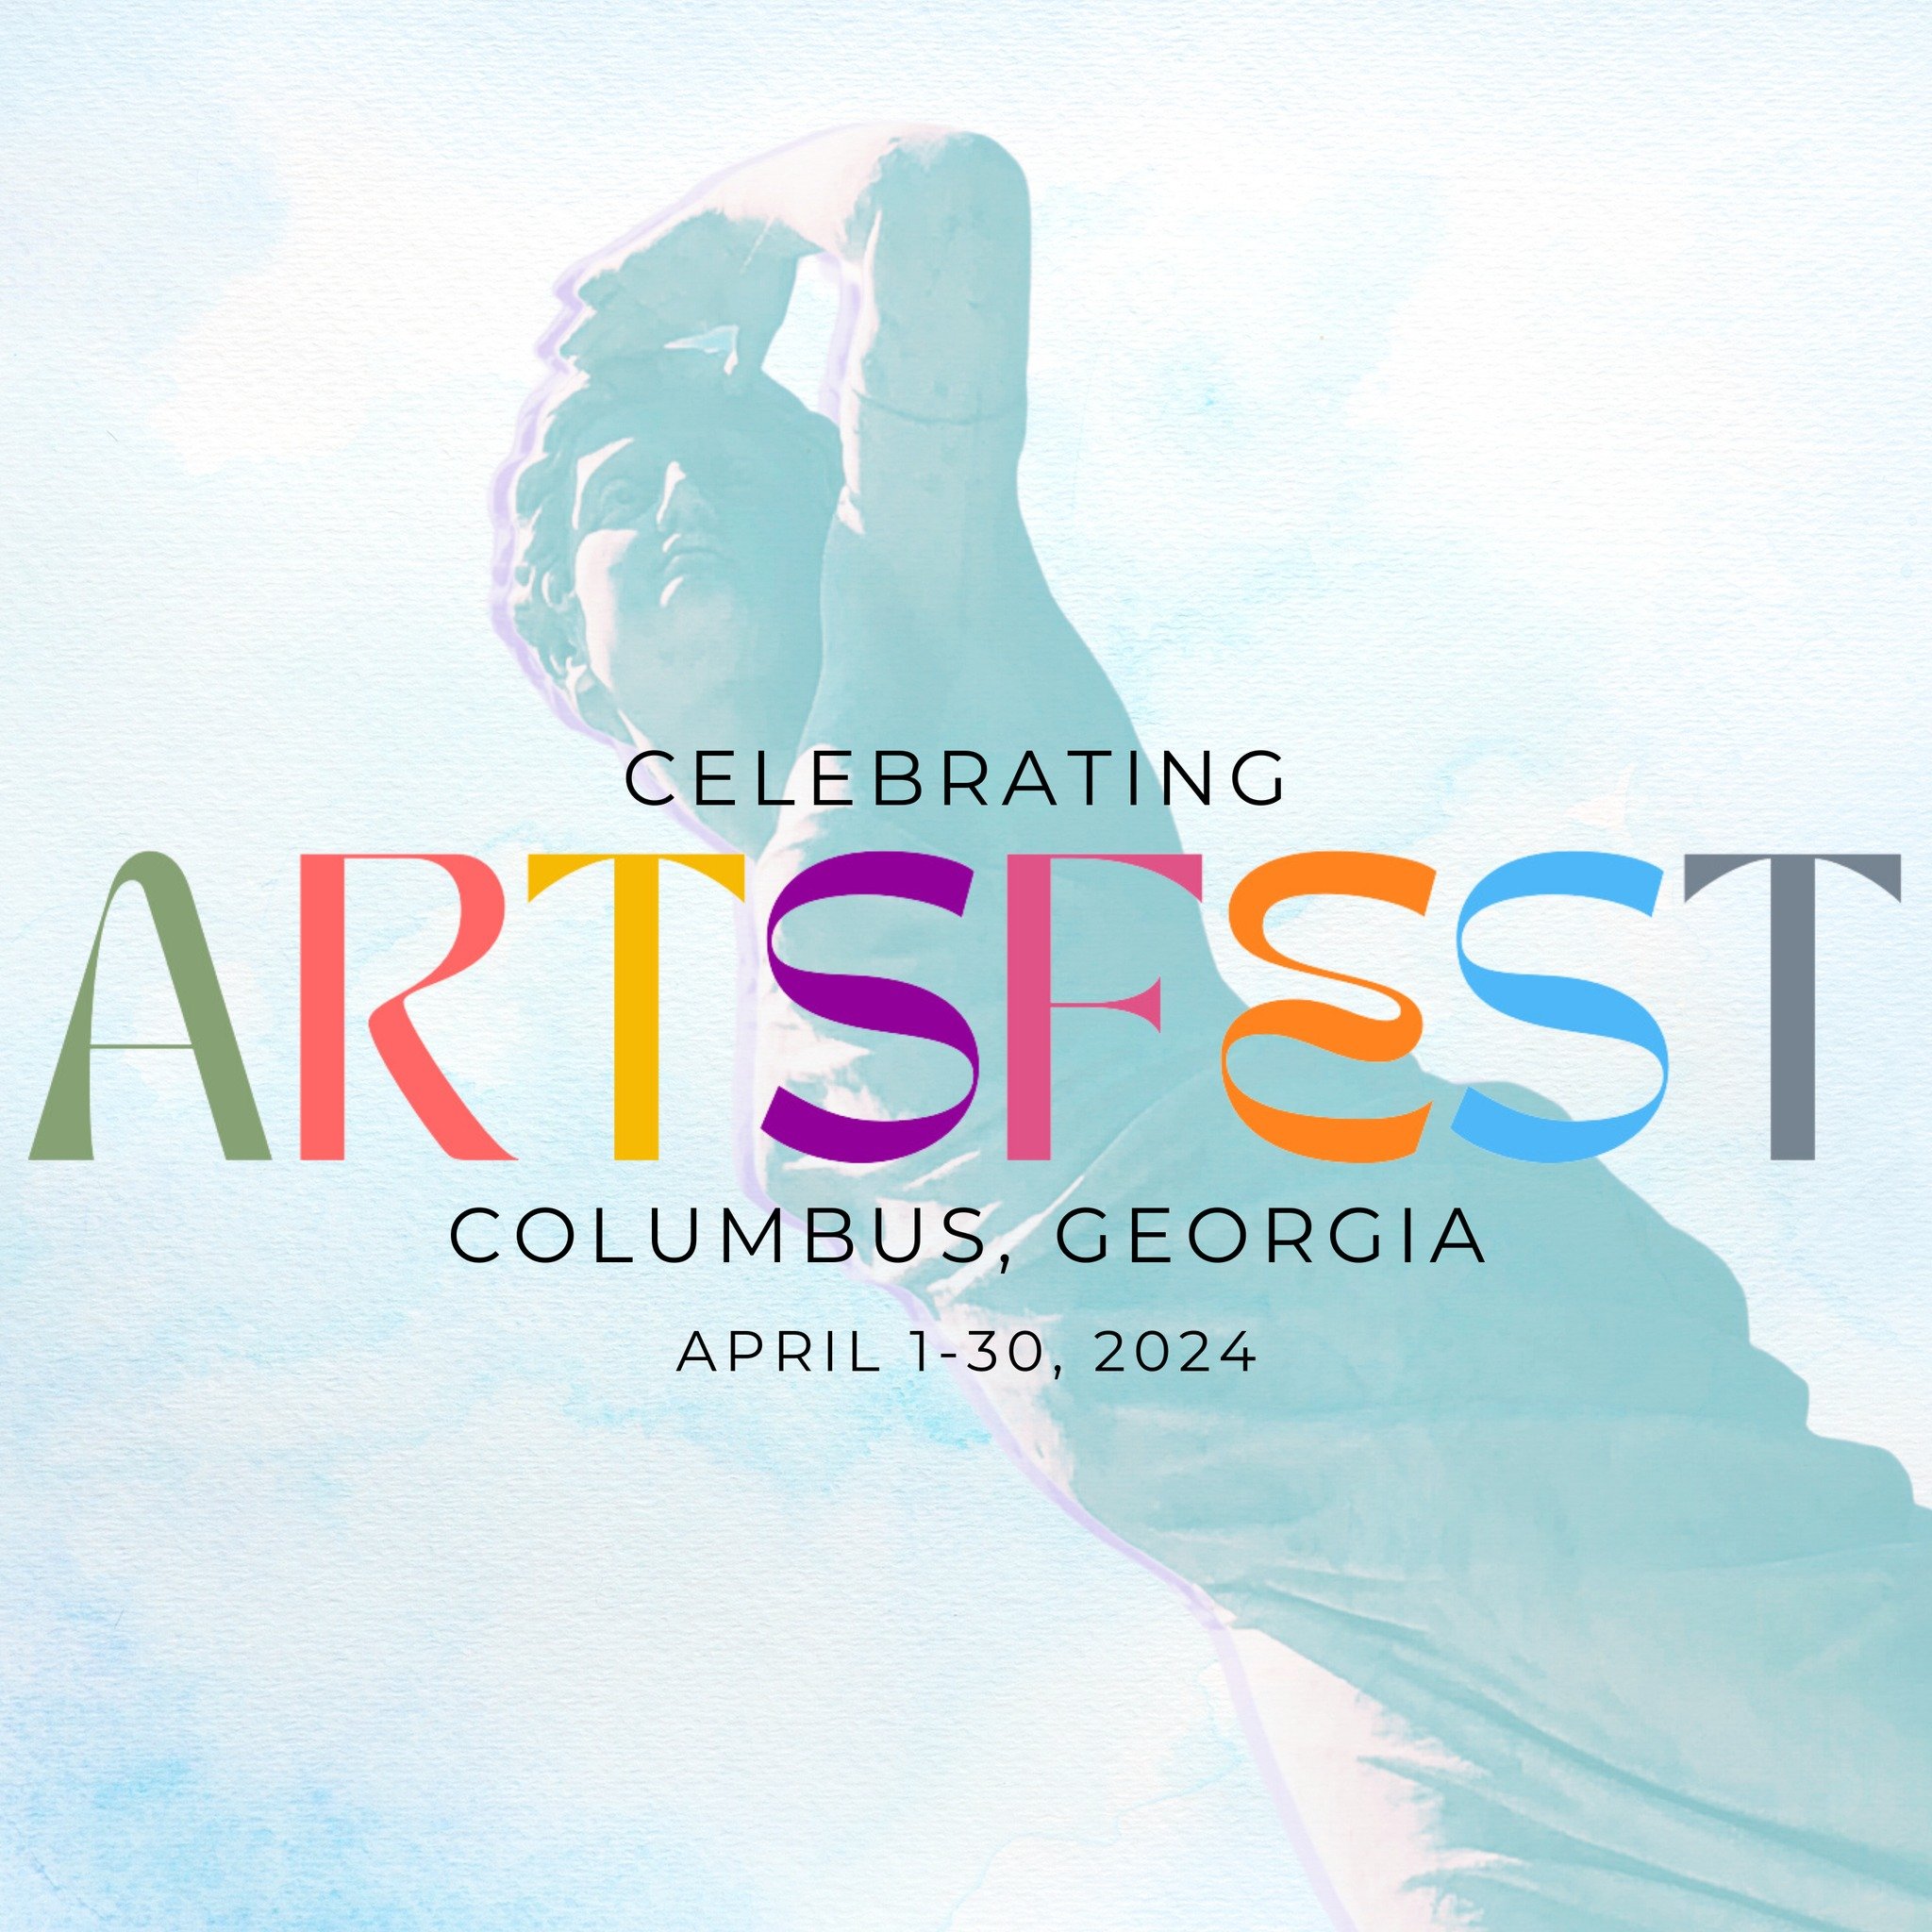 Celebrate Arts and Culture Month in Columbus, Georgia by bringing your family to the fun-filled ArtsFest Block Party on April 20 from 9AM-12PM on the grounds of the RiverCenter for the Performing Arts! Experience the incredible sights and sounds of l